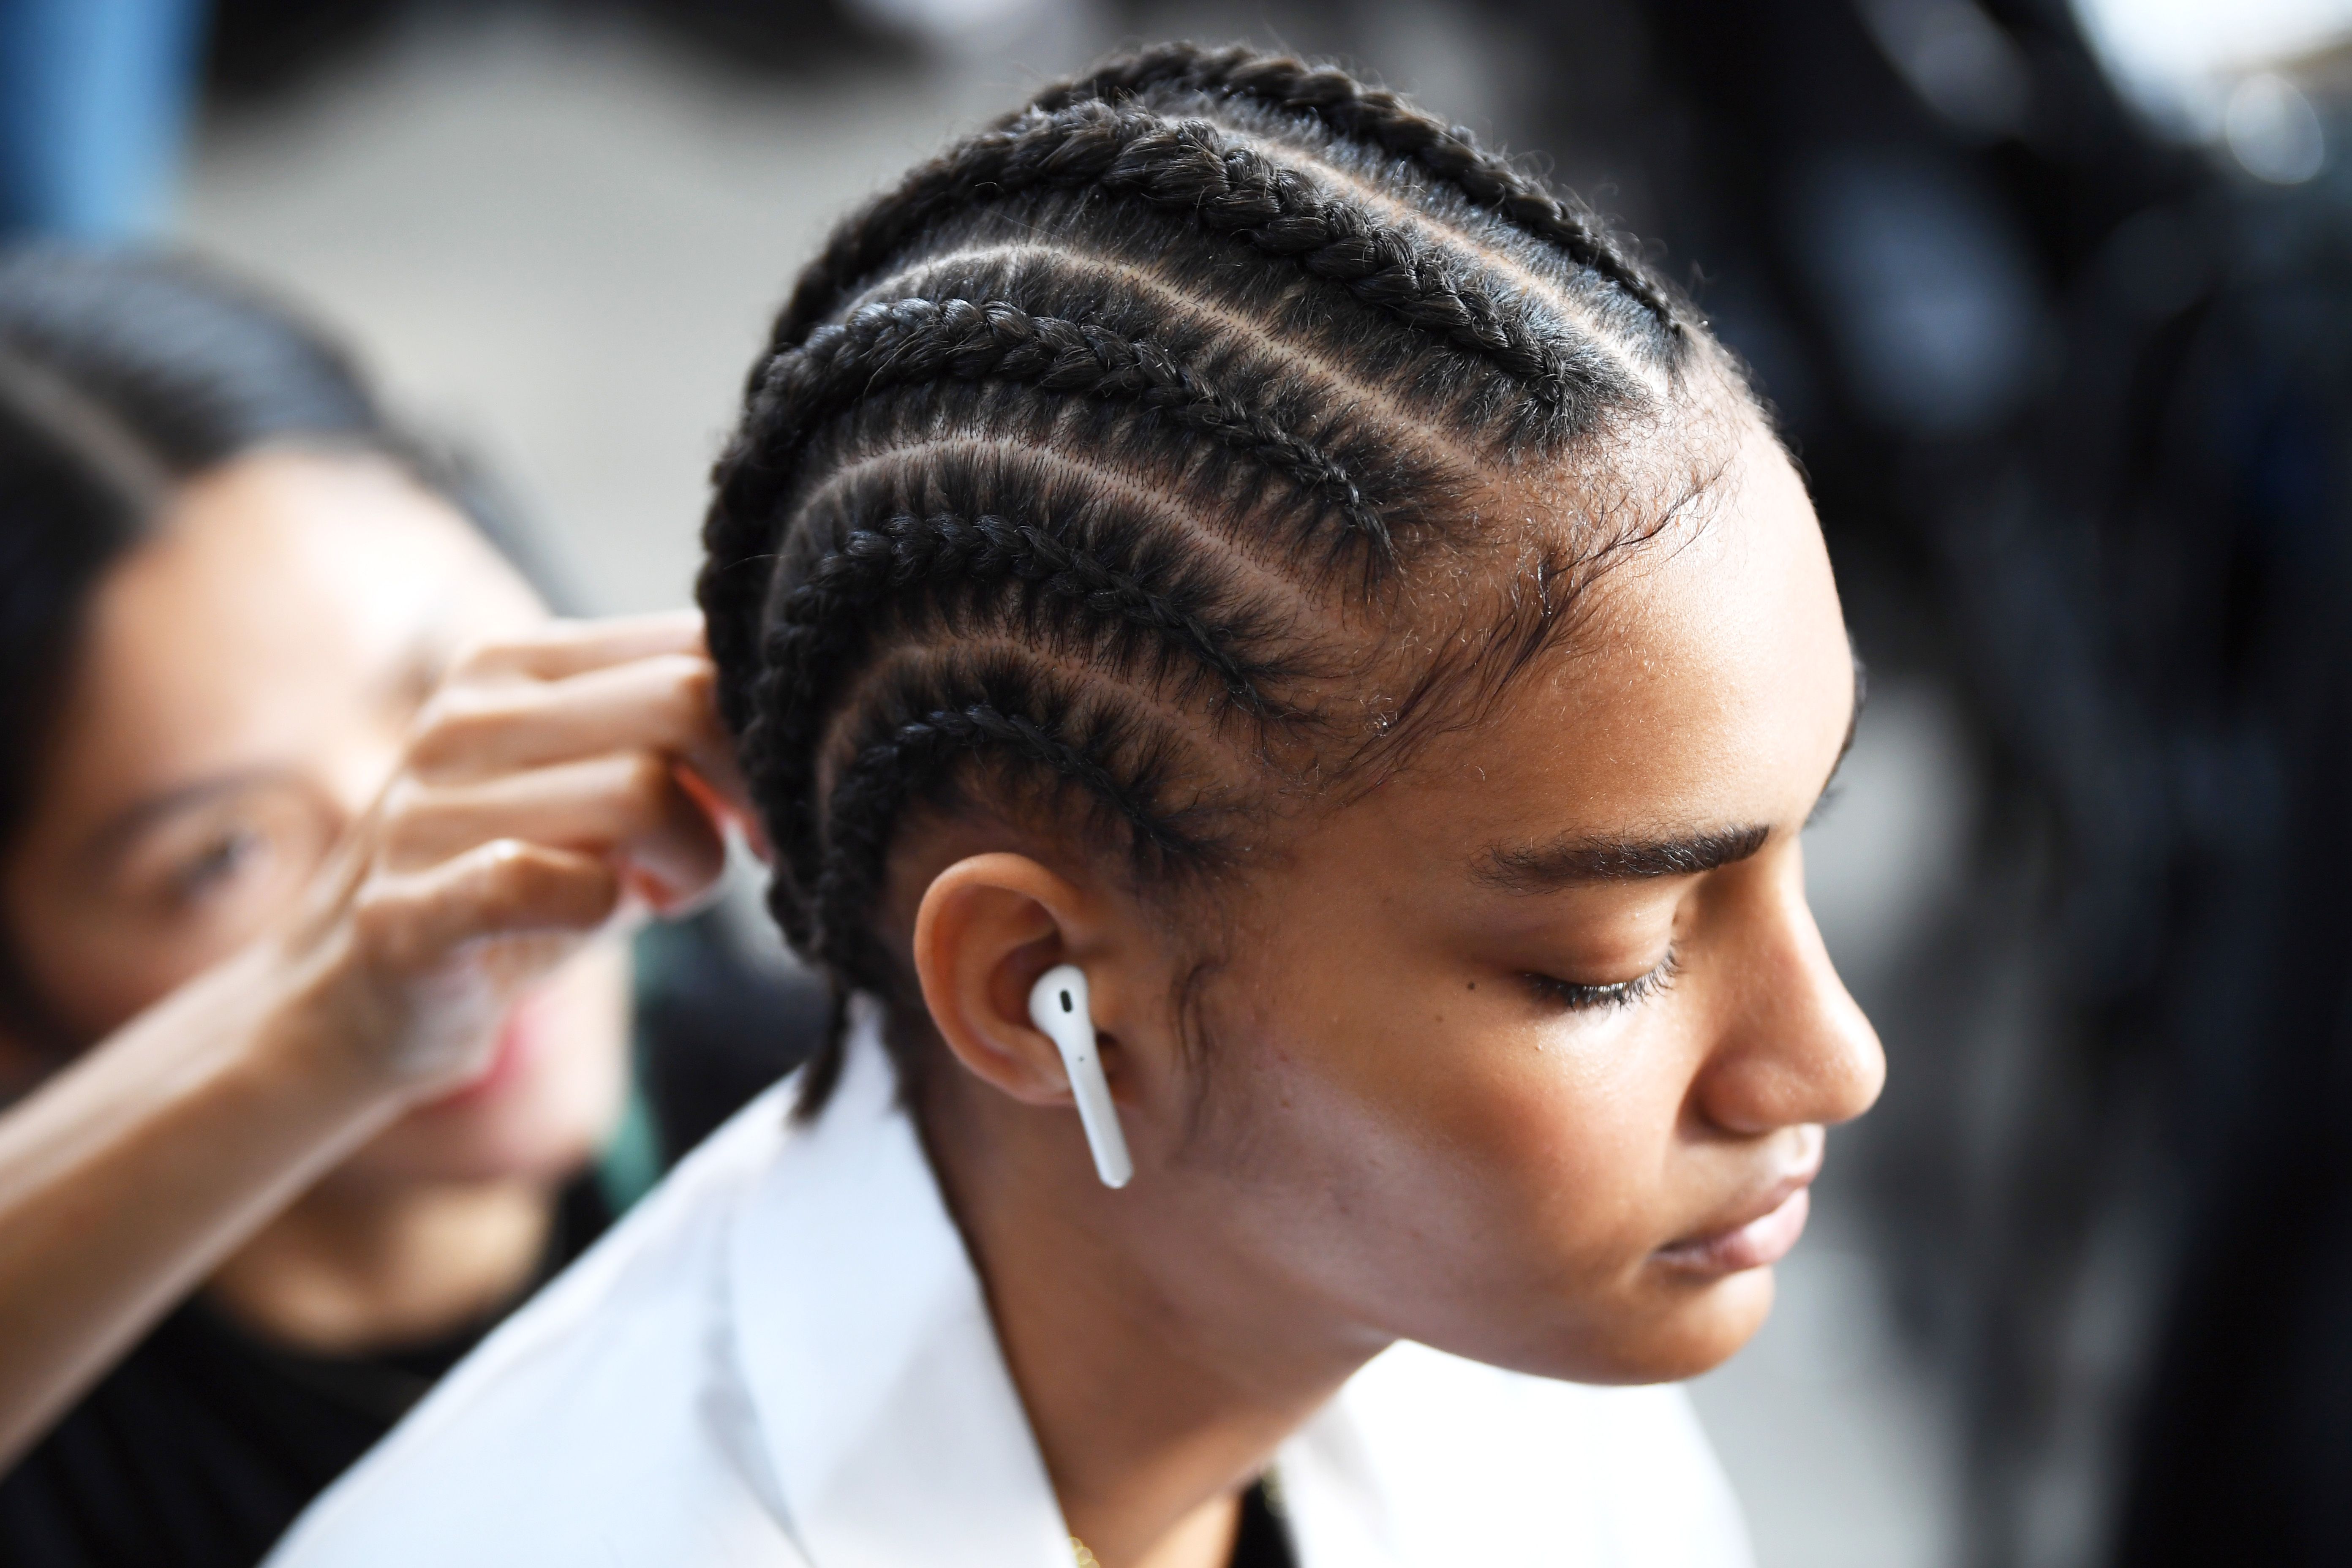 Braided Hairstyles: 8 Beautiful Short Looks For Inspiration